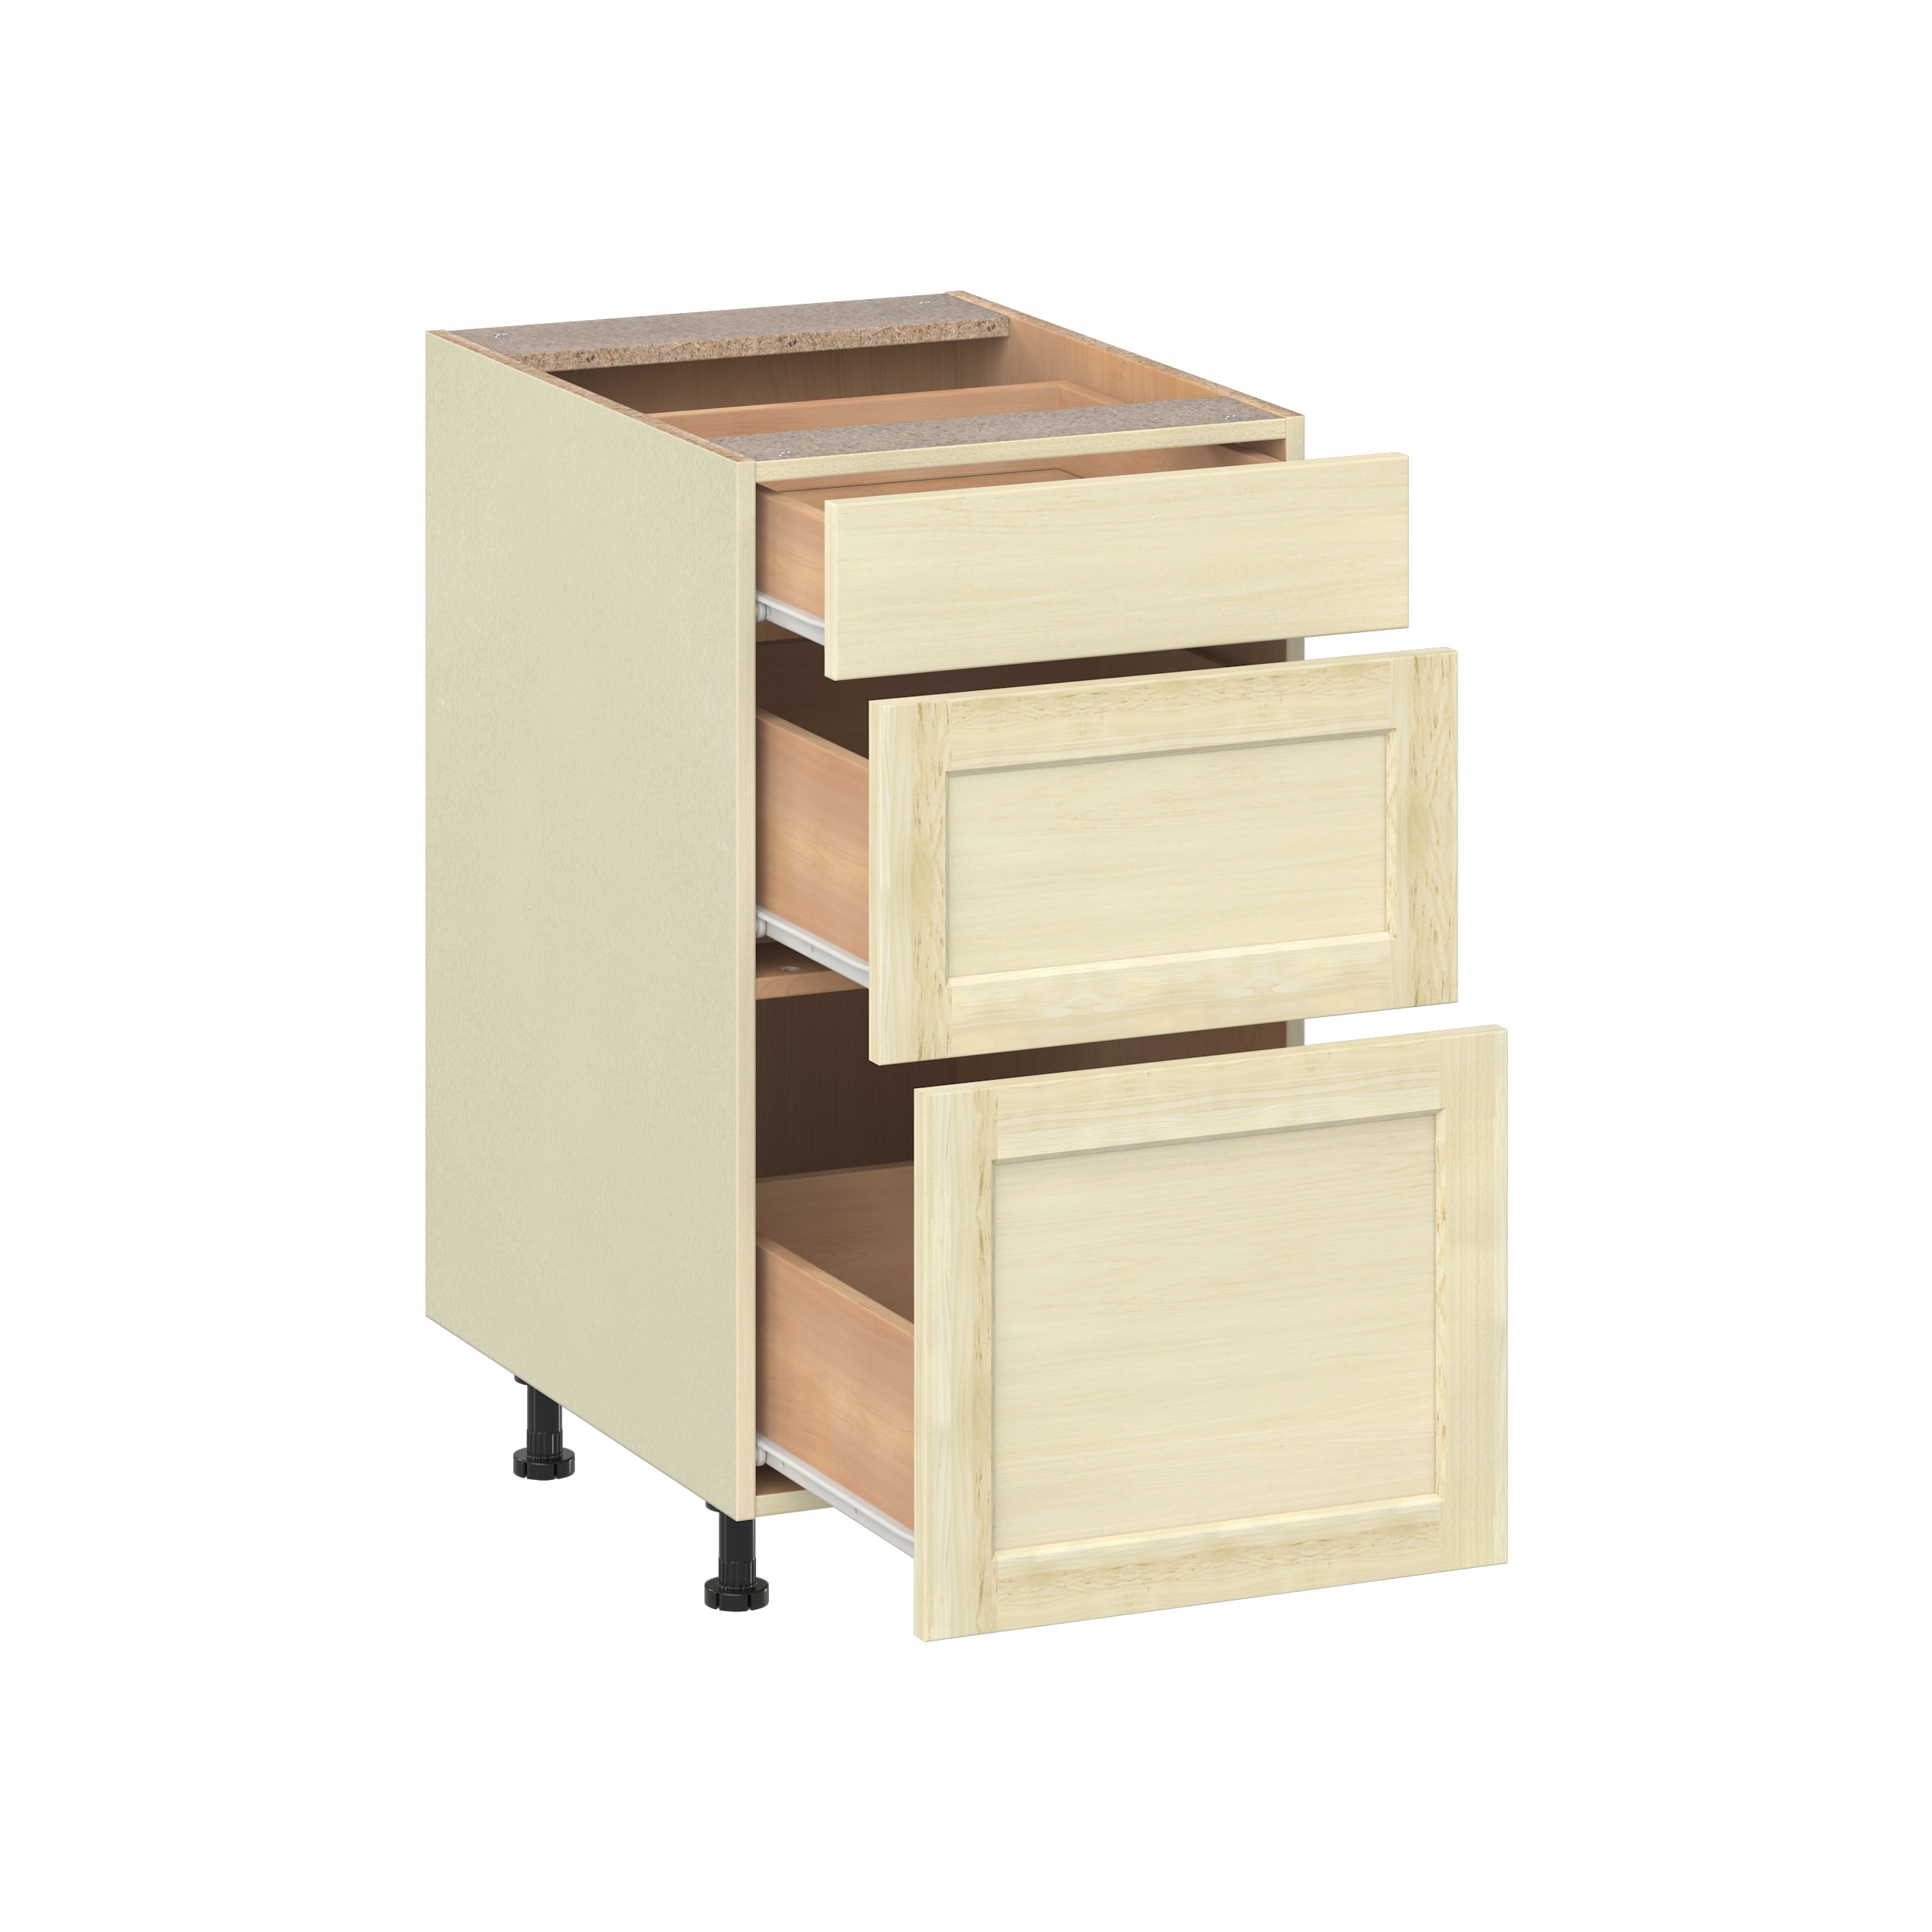 Carl bought this a Lowe's. The cabinet is a Stack-ON 18 Drawer Storage  Cabinet. I bought mine at Lowe's for $19.96. The…